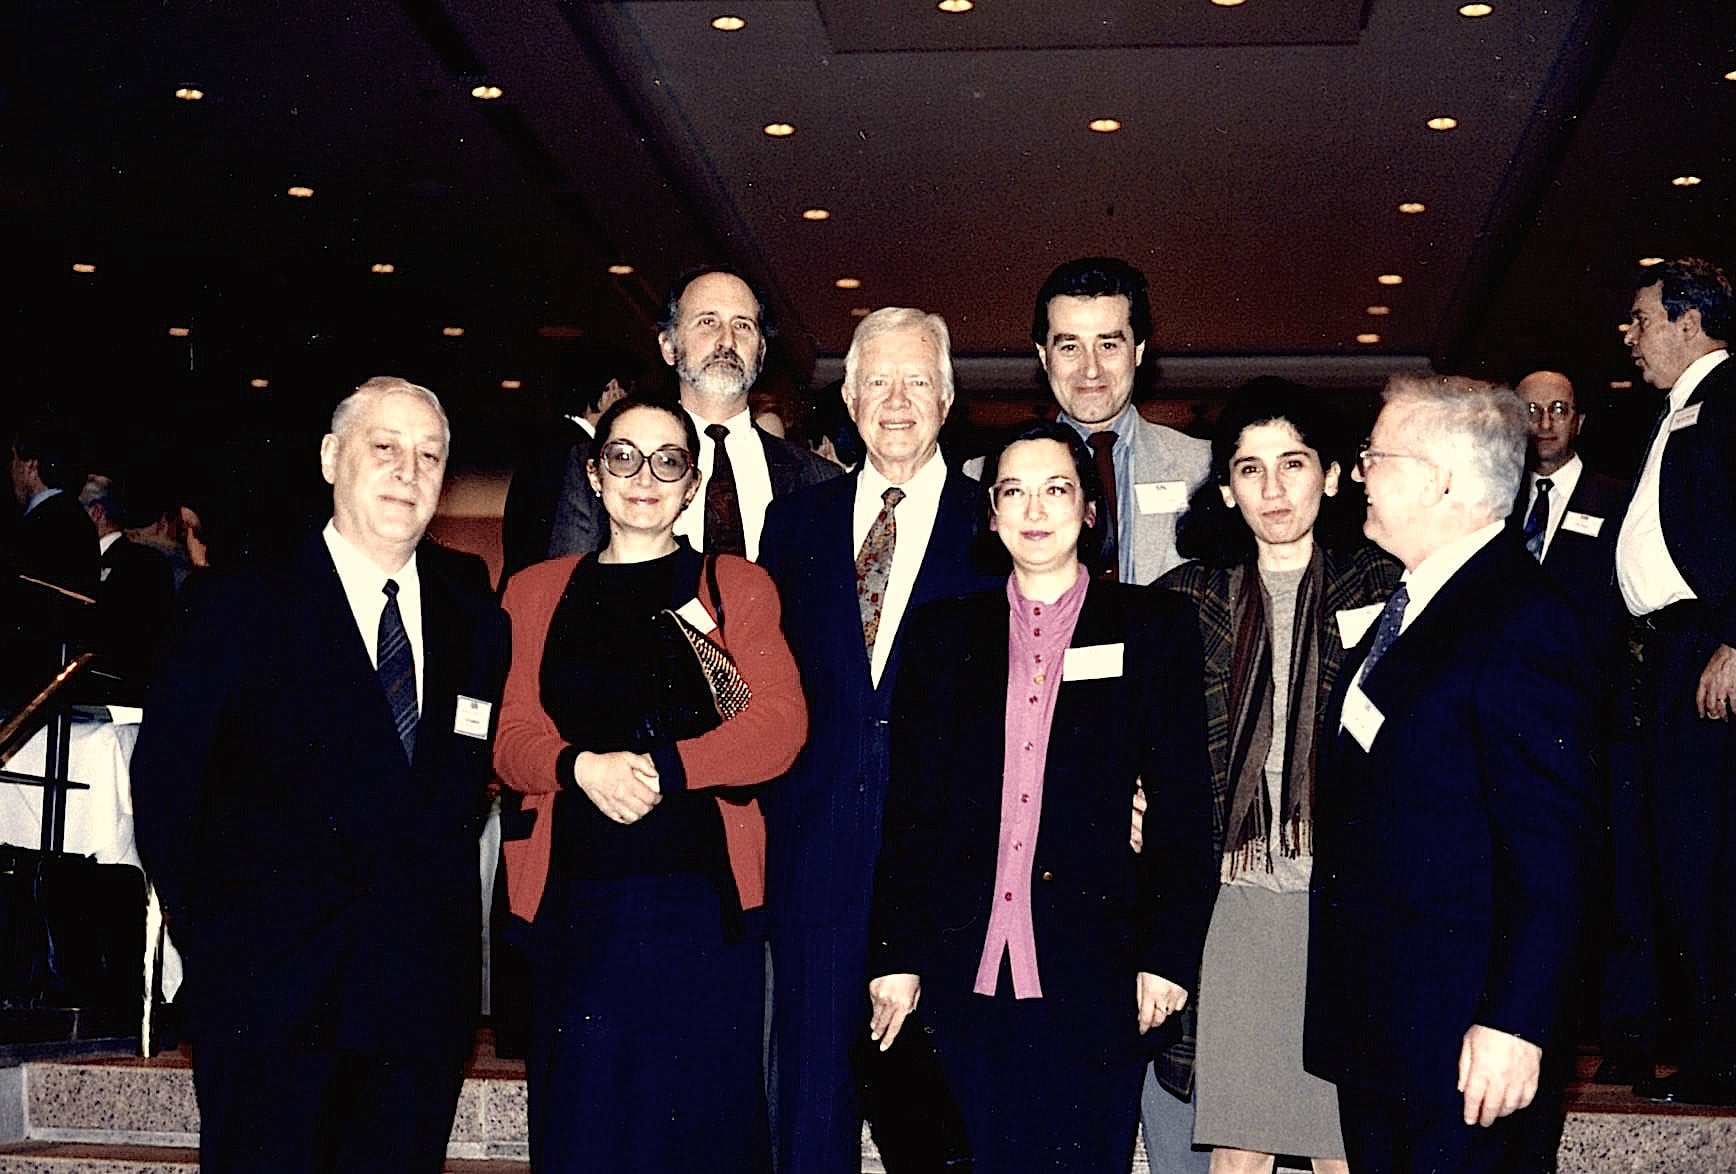 Left to right: the late Yuri Kalmykov (a Circassian who resigned as Minister of Justice in Yeltsin's cabinet rather than sign the governmental decree to send Russian troops into battle in Chechenia), Natella Akaba, Prof. John Colarusso (American specialist on Circassian at McMaster University, Hamilton, Ontario), President Jimmy Carter, Galina Kalimova, Prof. George Hewitt (SOAS, London), Liana Kvarchelia, the late Yahya Kazan(ba), a Circassian-speaking Abkhazian from New York.